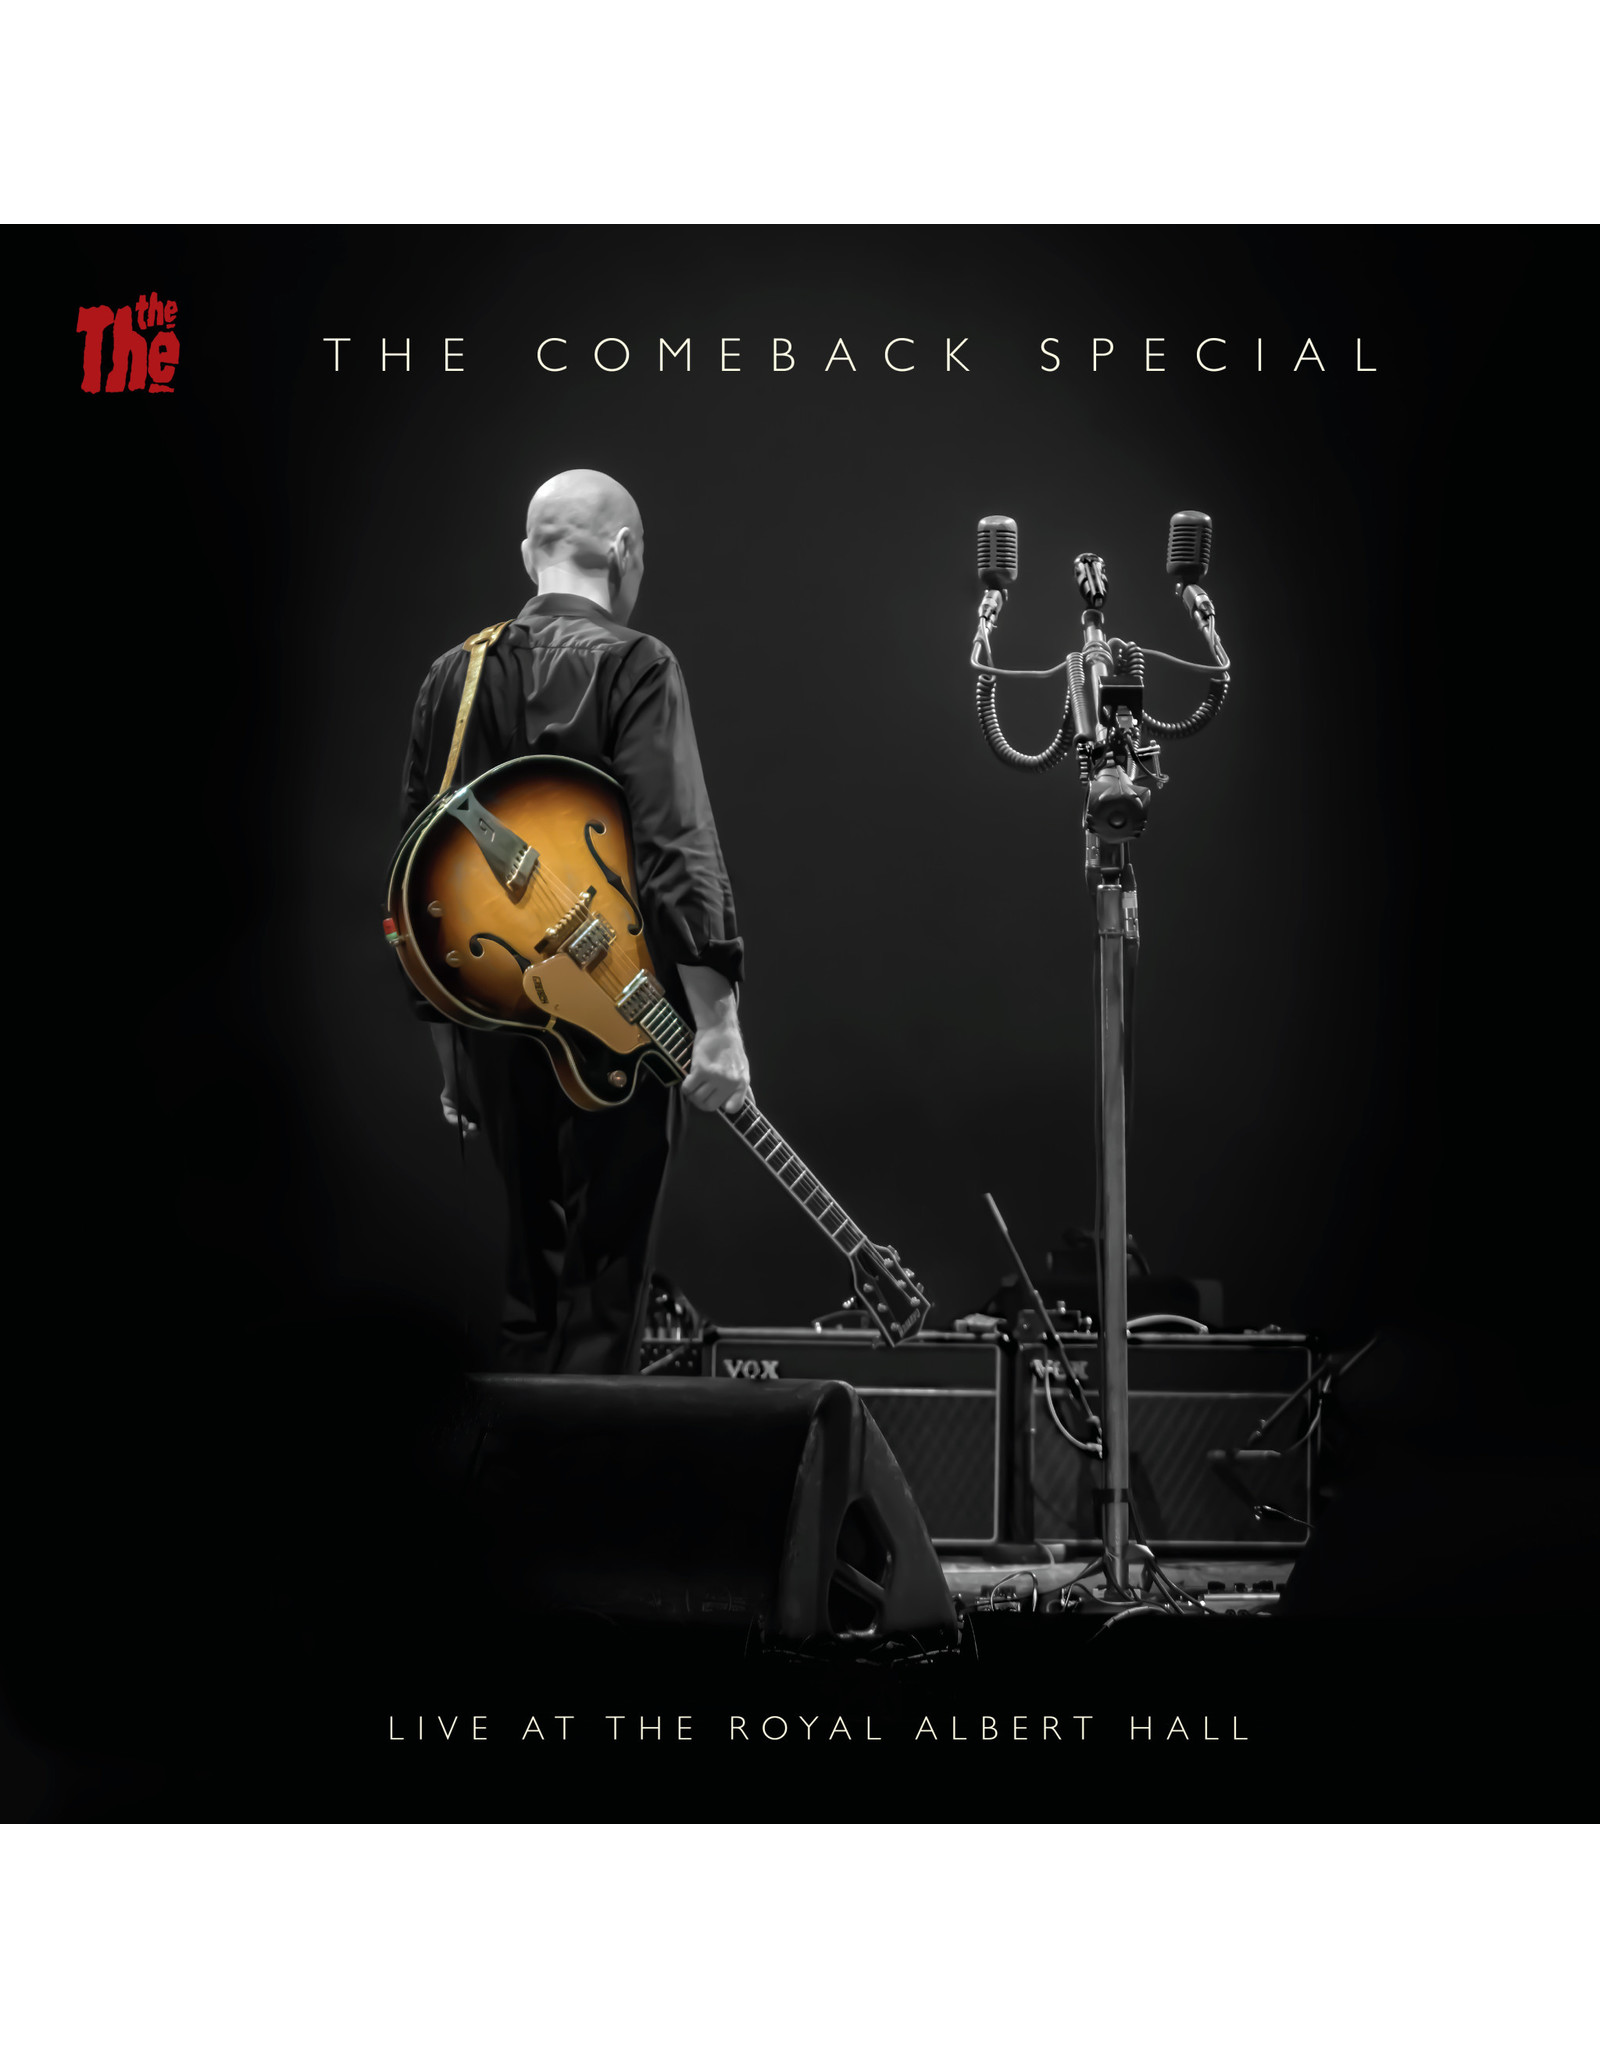 The The - Comeback Special: Live At Royal Albert Hall 2 CD